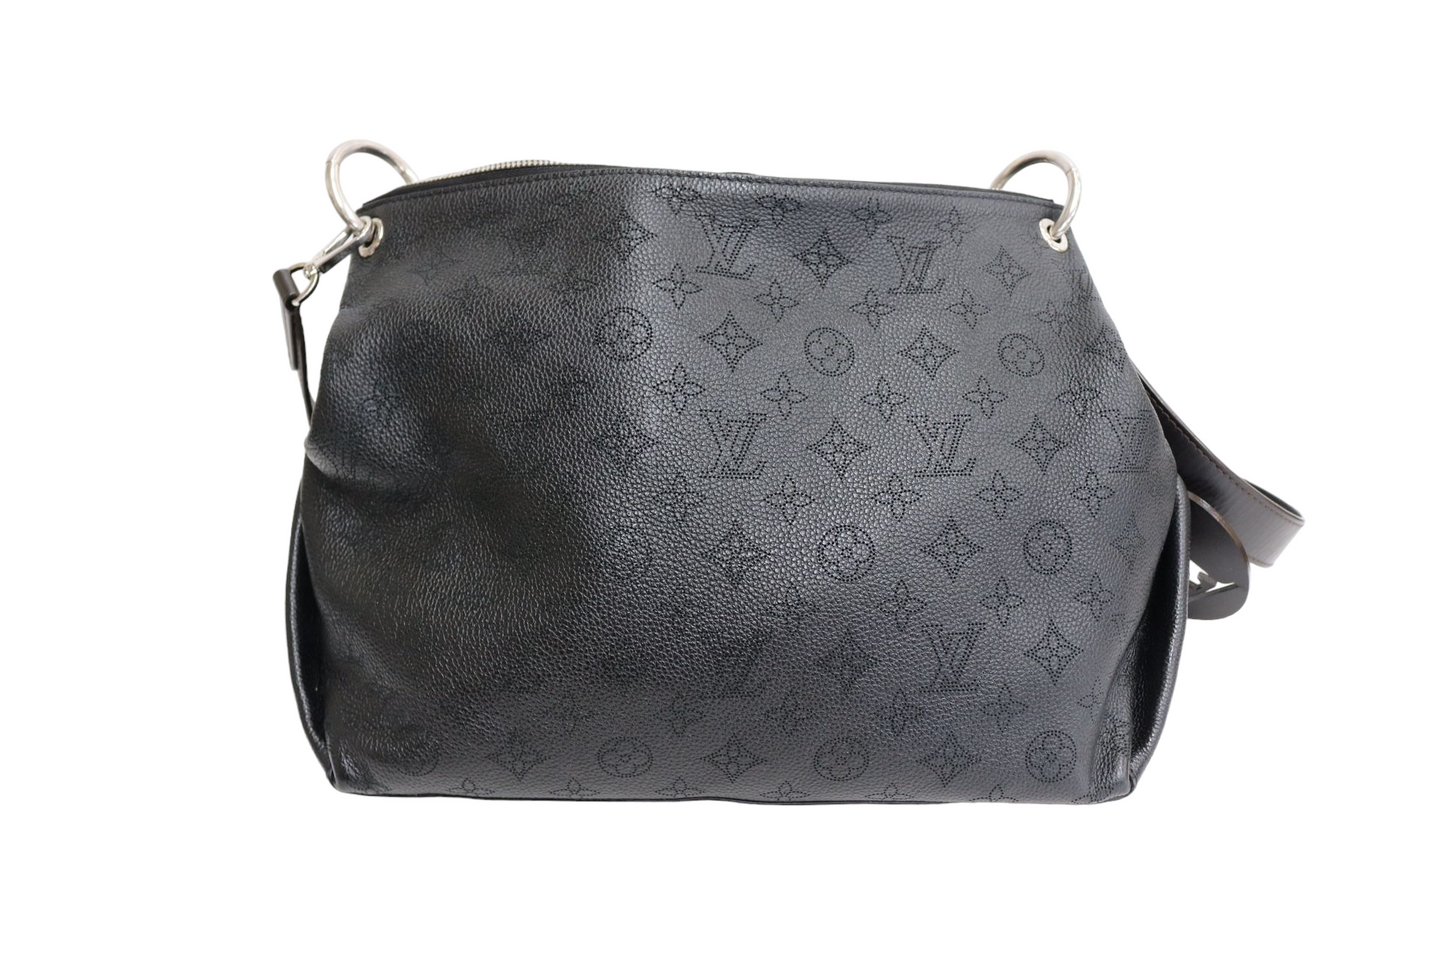 Authentic Louis Vuitton Mahina Beaubourg Hobo MM Black Bag (Local Pick-Up Only)